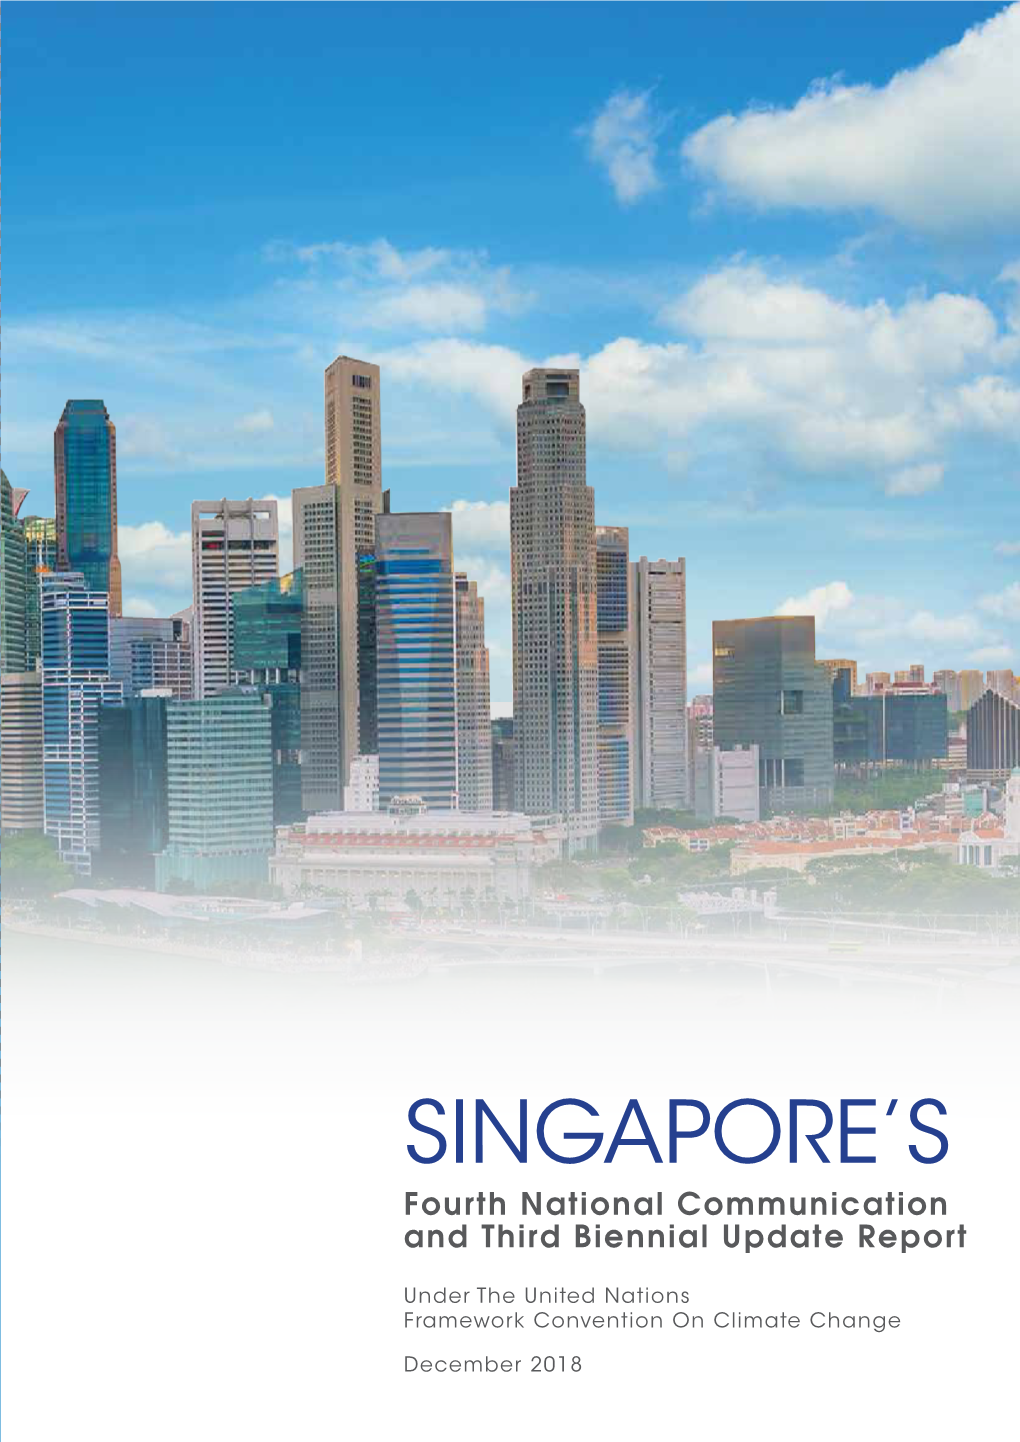 Singapore's Fourth National Communication and Third Biennial Update